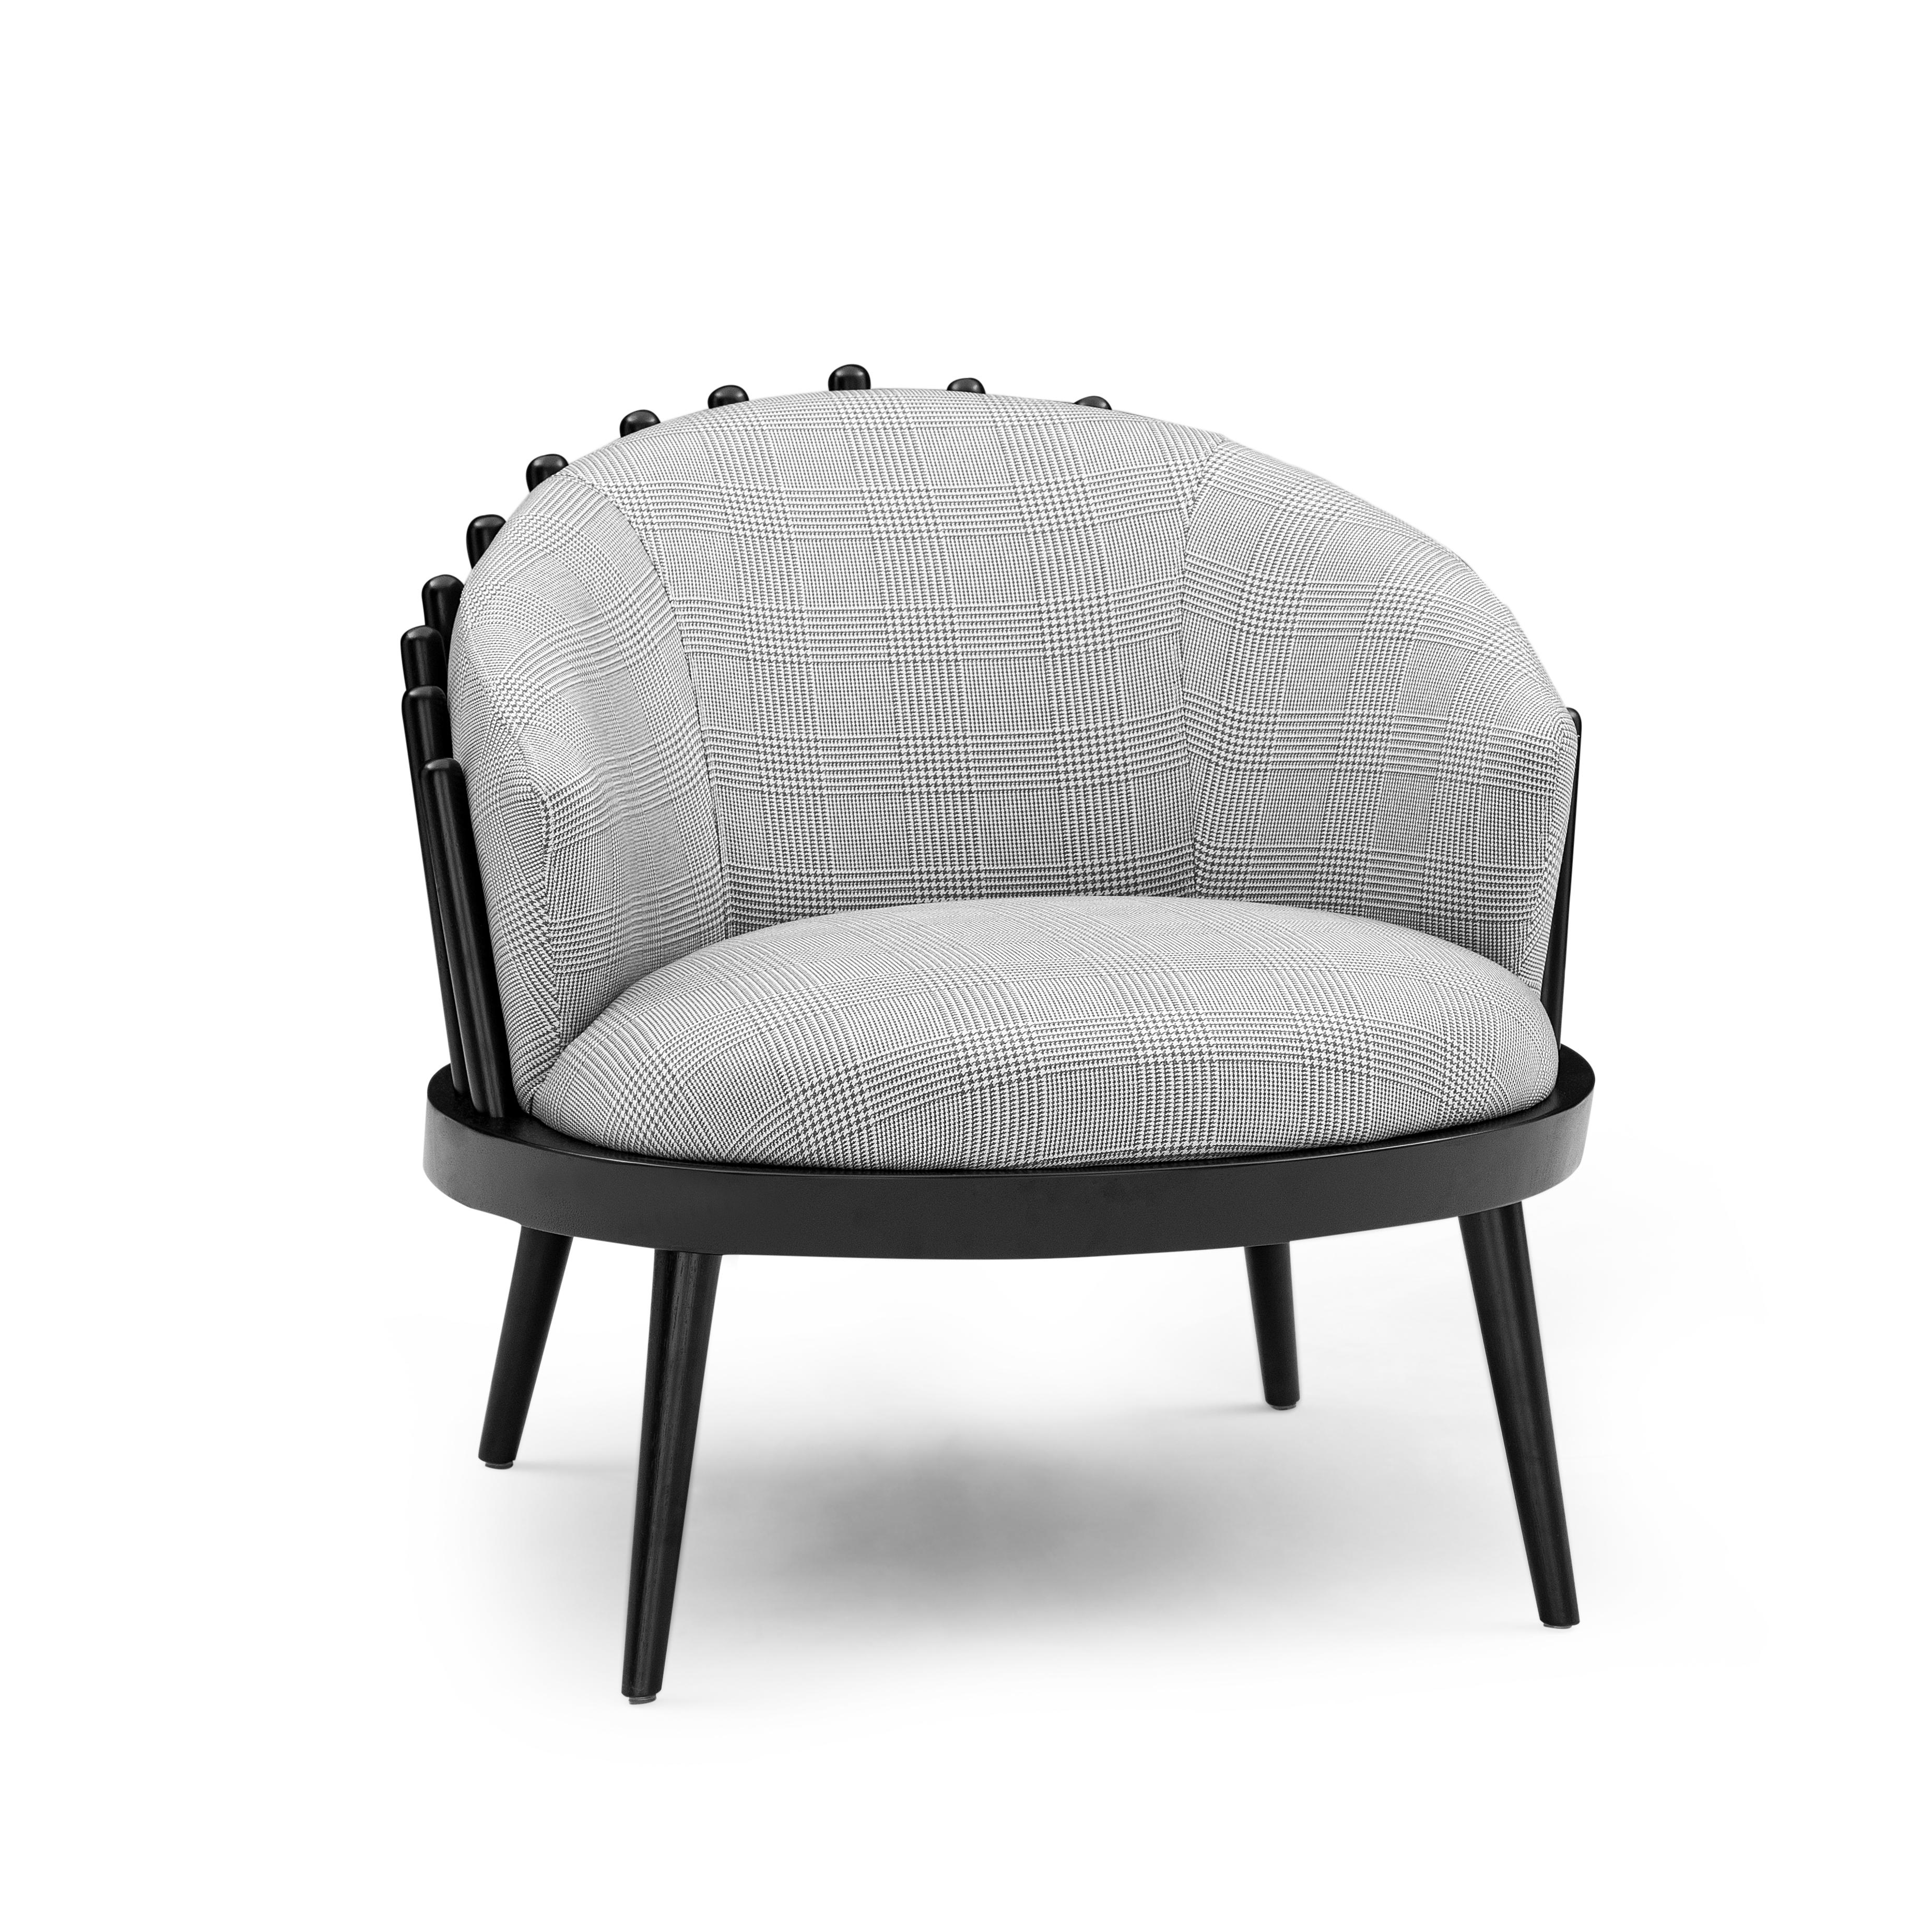 Fane Upholstered Armchair in Black Wood Finish and Plaid Fabric In New Condition For Sale In Miami, FL